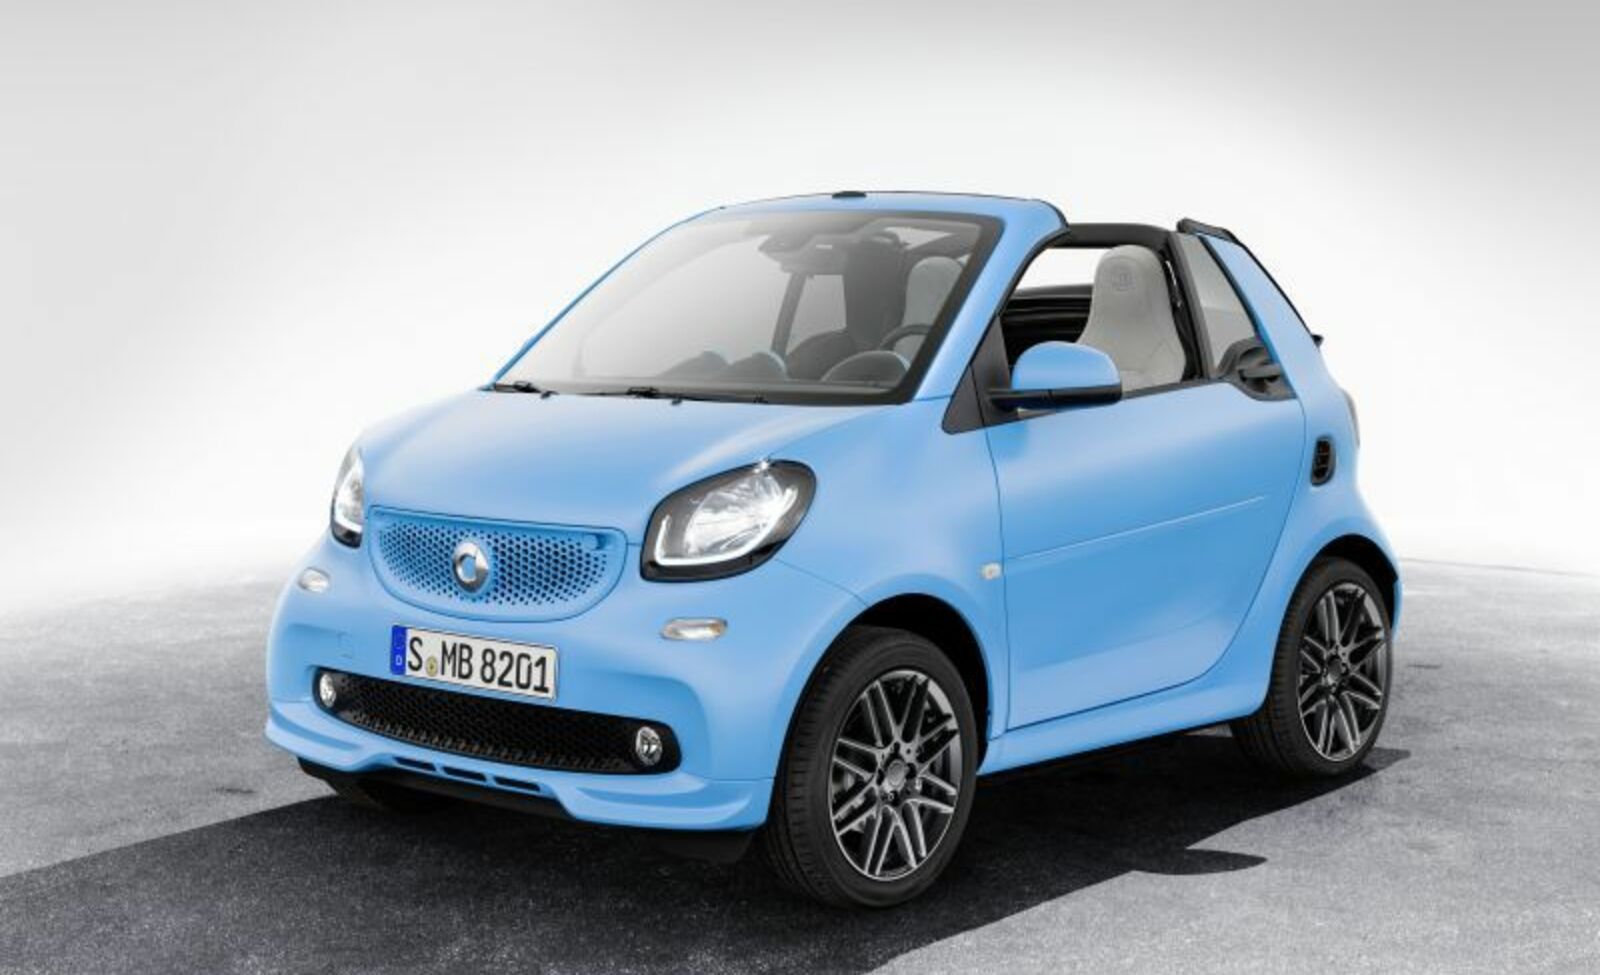 Smart Fortwo III cabrio (A453) 17.6 kWh (75 Hp) electric drive 2014, 2015, 2016, 2017 